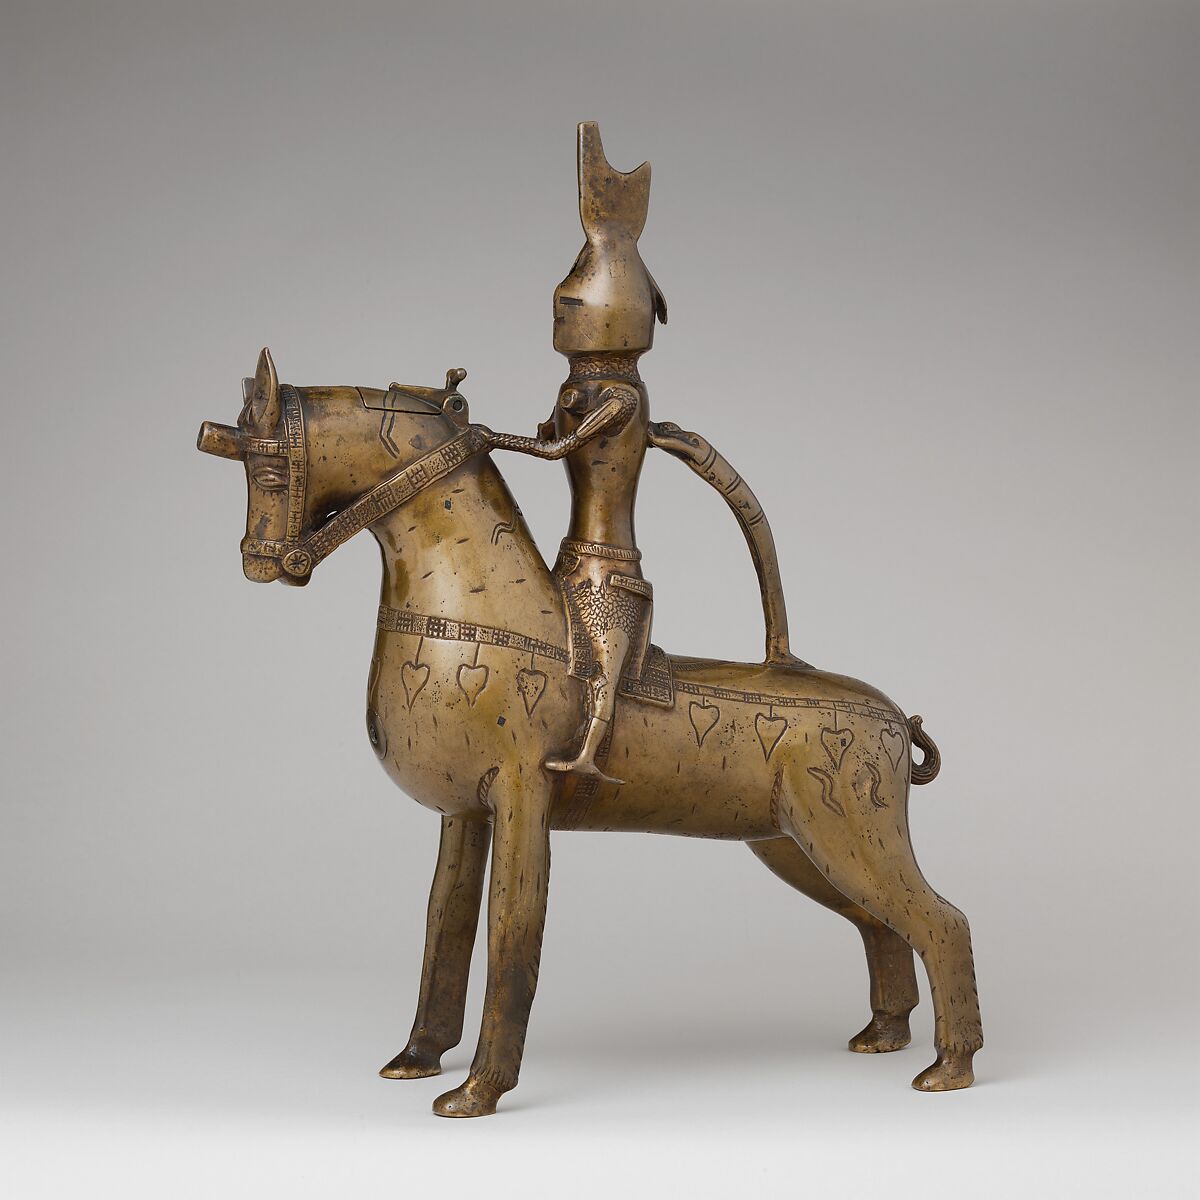 Aquamanile in the Form of a Knight on
Horseback, Bronze; Quaternary copper alloy with a high content of zinc (approx. 73% copper, approx. 15% zinc, approx. 7% lead, approx. 3% tin) with natural patina, hollow cast; remnants of the clay core
and iron armature in the legs, German, Lower Saxony (?) 